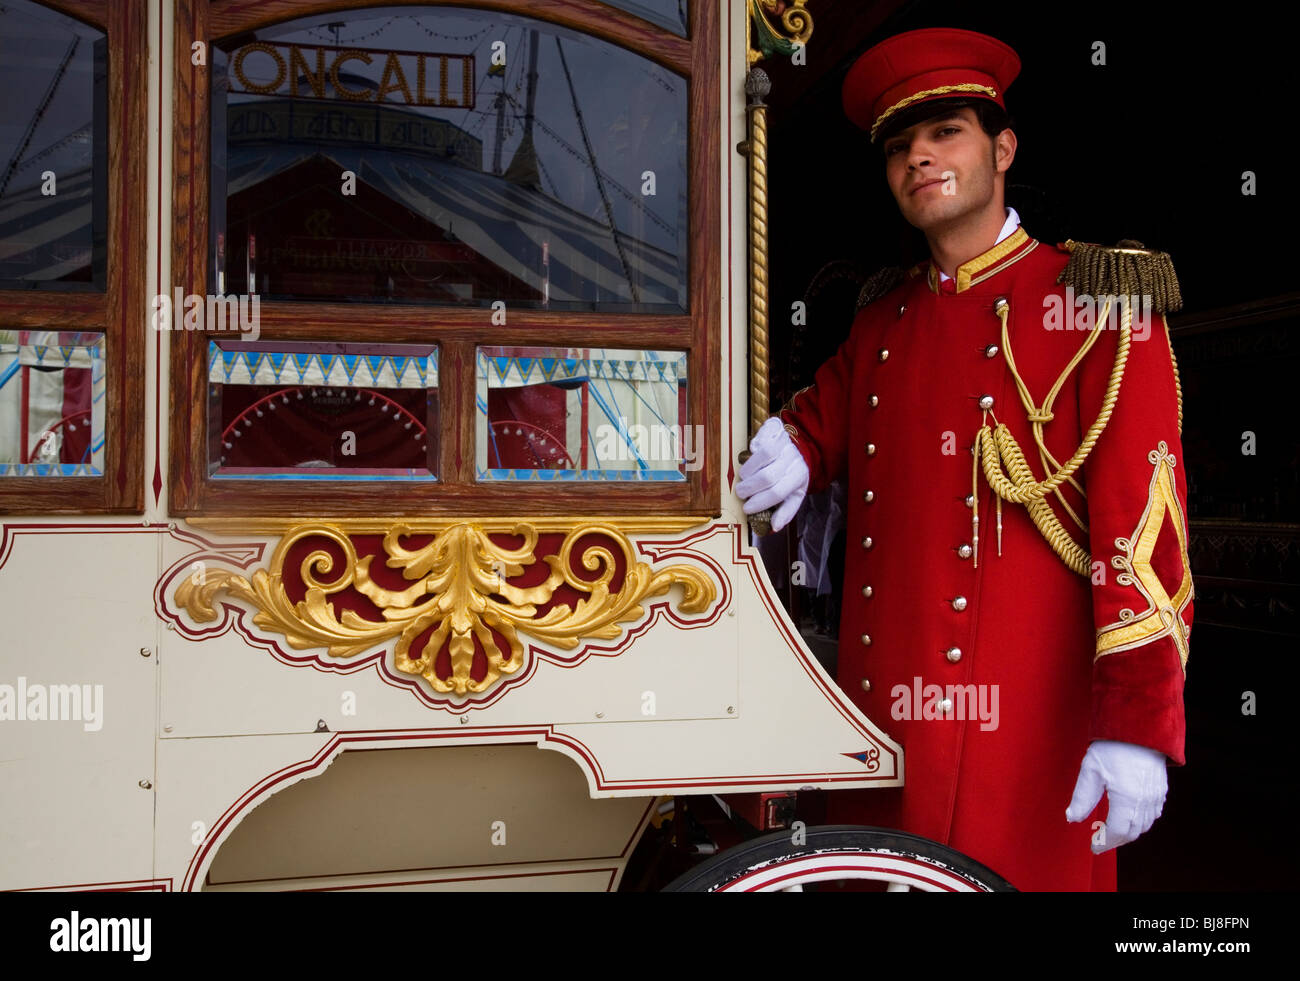 A Circus Usher in front of a Sugar Candy Machine. Circus Roncalli. Munich, Germany Stock Photo